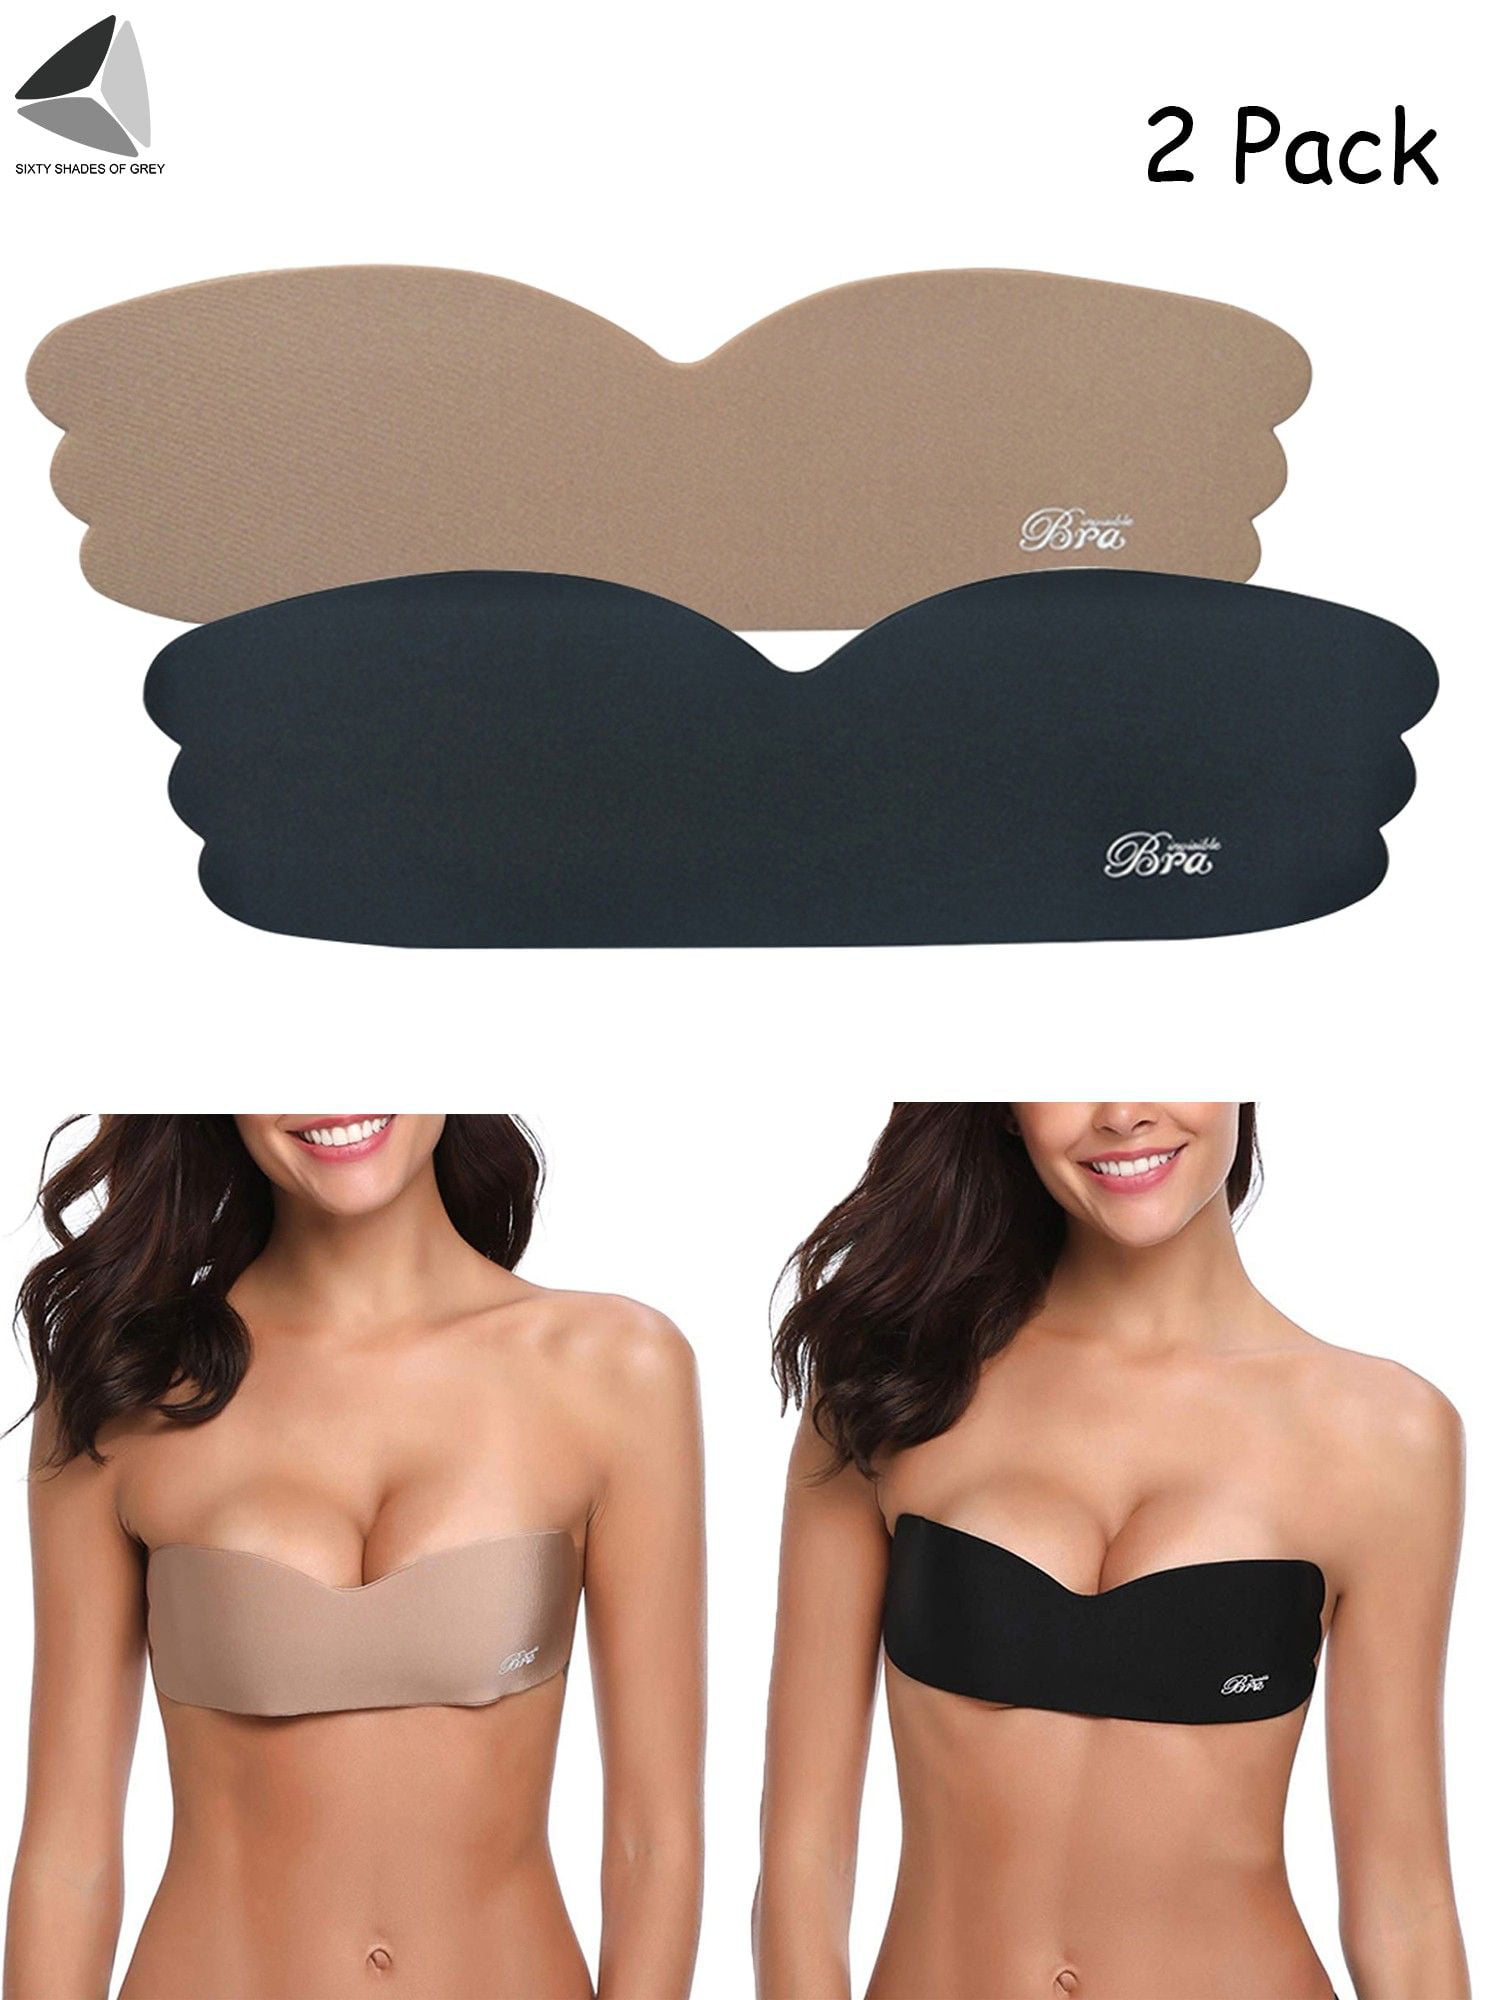 PULLIMORE 2 Pack Womens Backless Invisible Bras One Piece Self-Adhesive  Push UP Strapless Bra Nippleless Covers (Cup A/B, Black+White) 